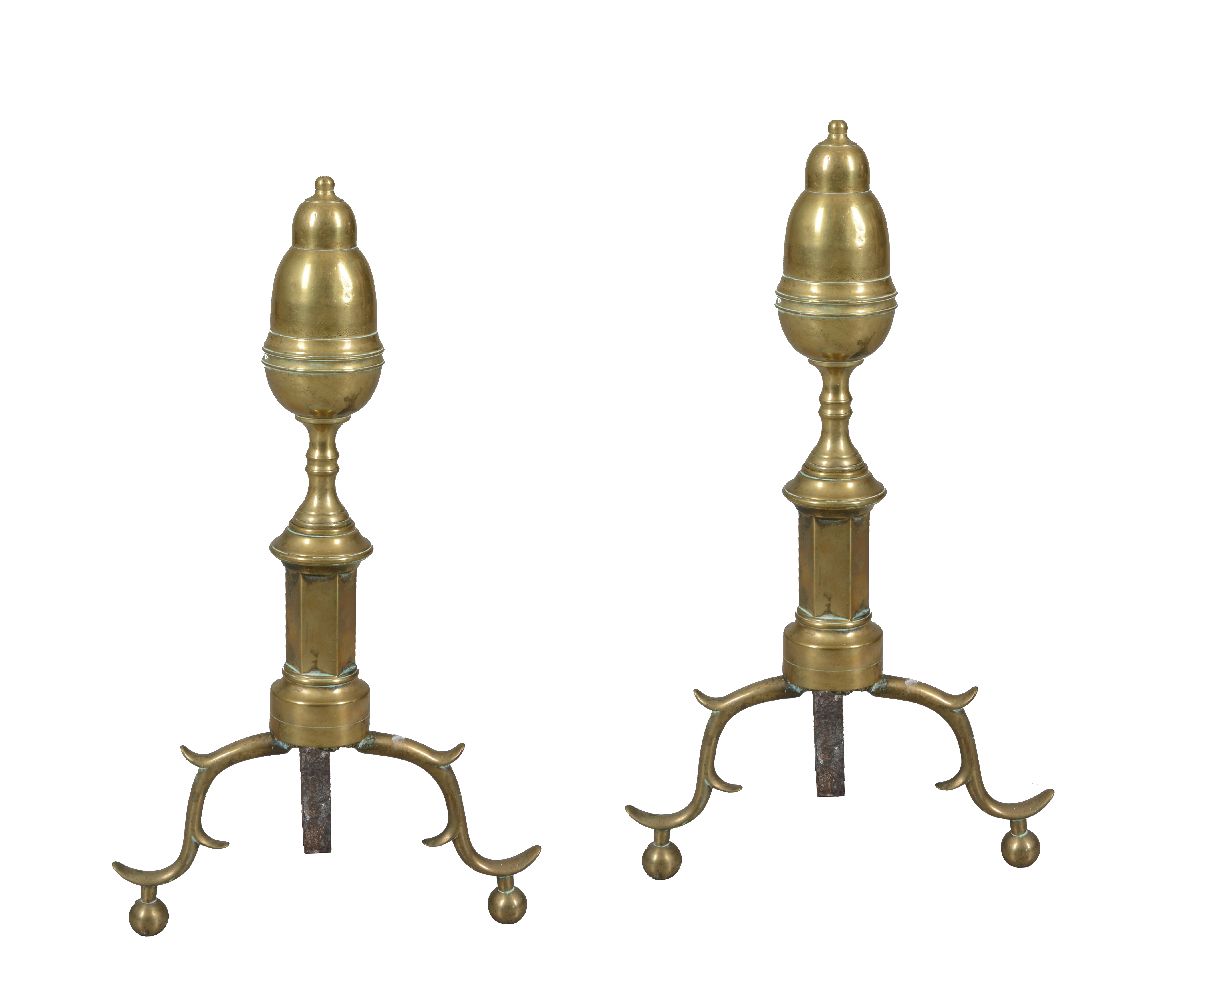 A pair of North American brass andirons